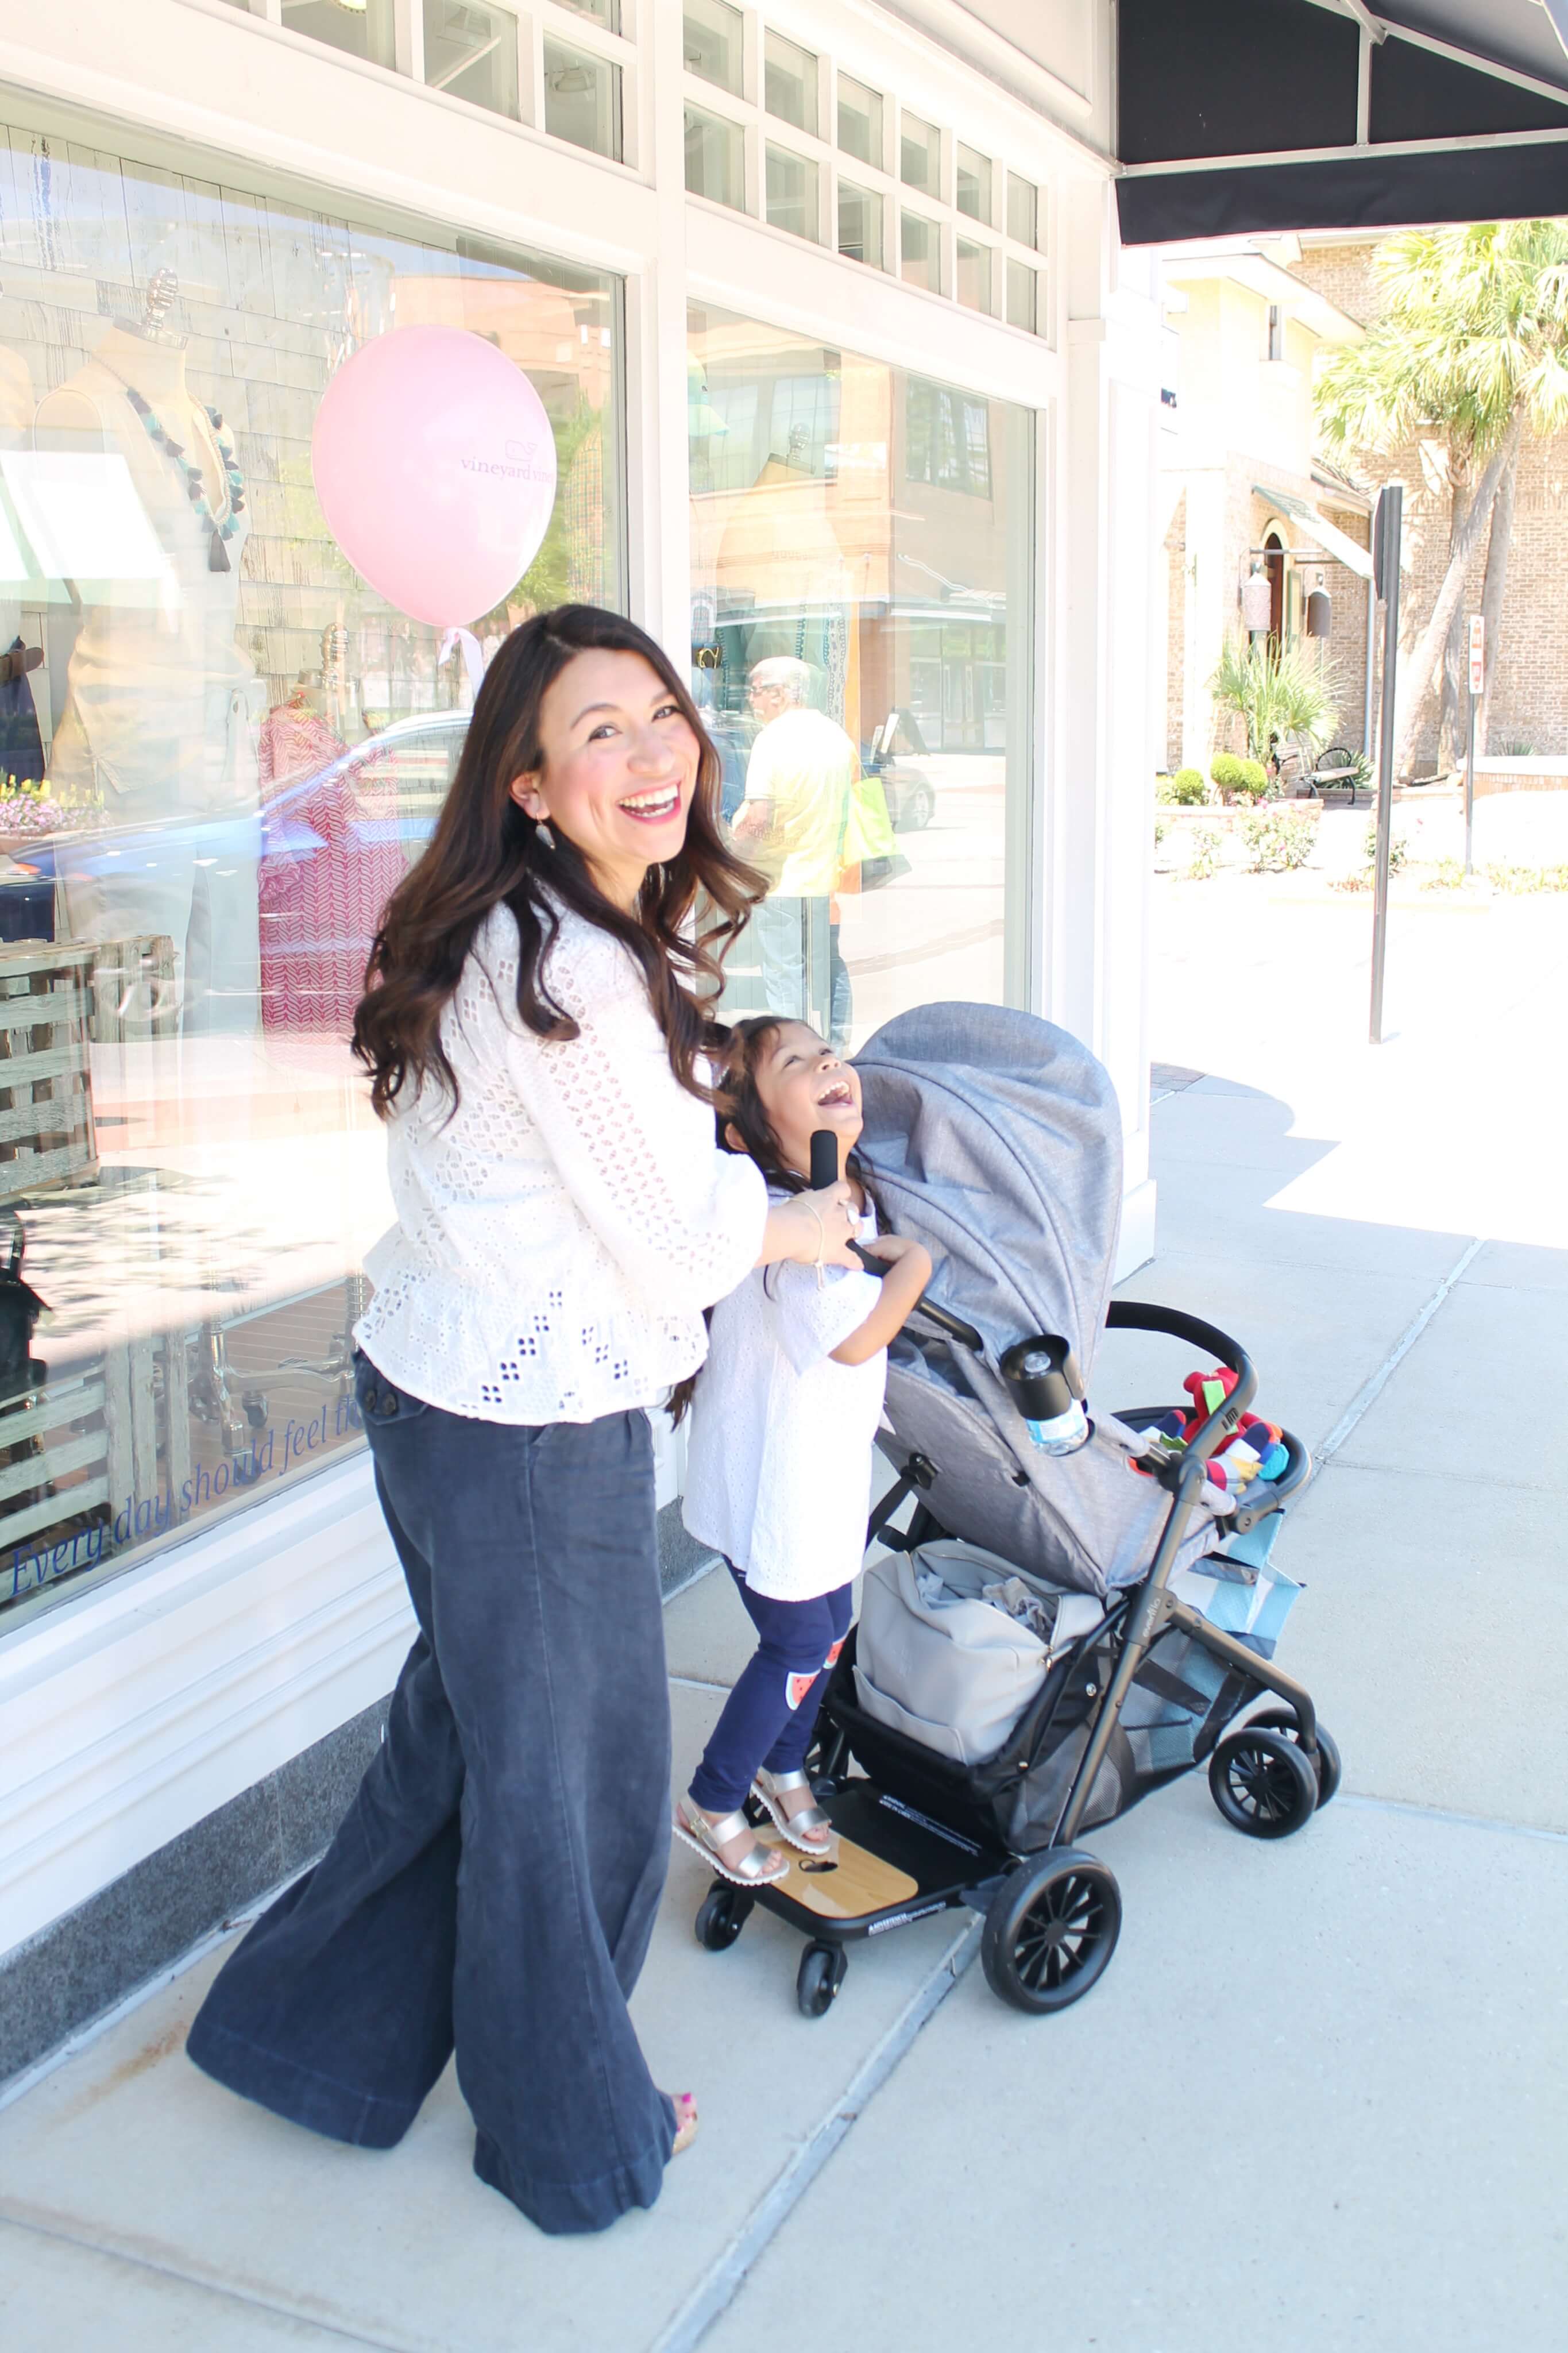 The cutest stroller for two kids. The Evenflo Sibby Travel System is a great buy at under $200 for your toddler and baby. The perks are incredible! Read the full review on Seven Graces. #ad #evenflospringbreak #generationevenflo